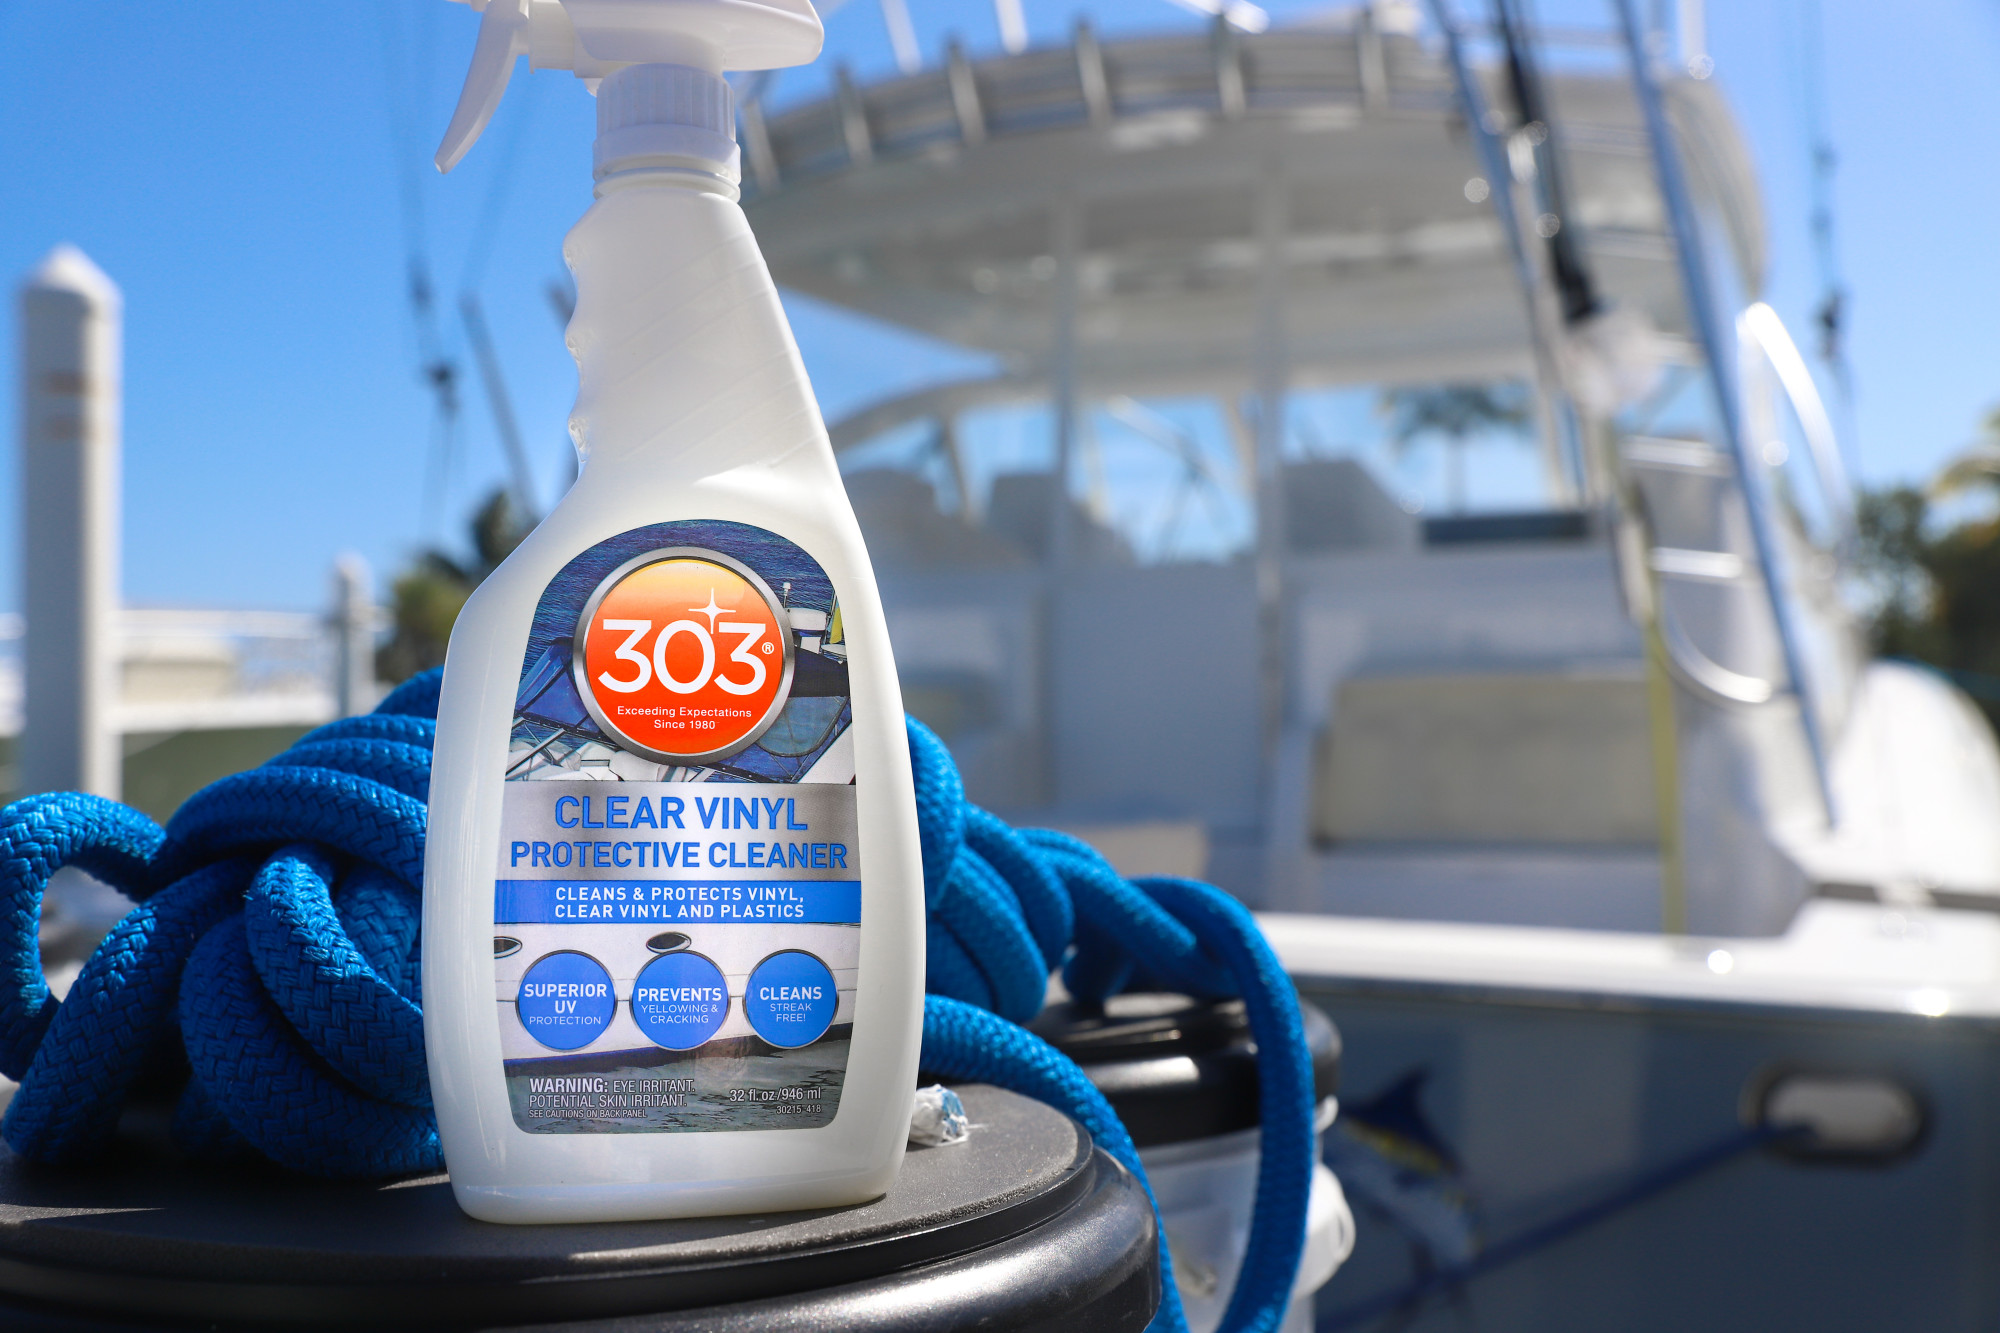 303 Marine Clear Vinyl Protective Cleaner Cleans and Protects Vinyl, Clear  Vinyl, and Plastics, Provides Superior UV Protection, Prevents Yellowing  and Cracking, 32oz (30215) Packaging May Vary